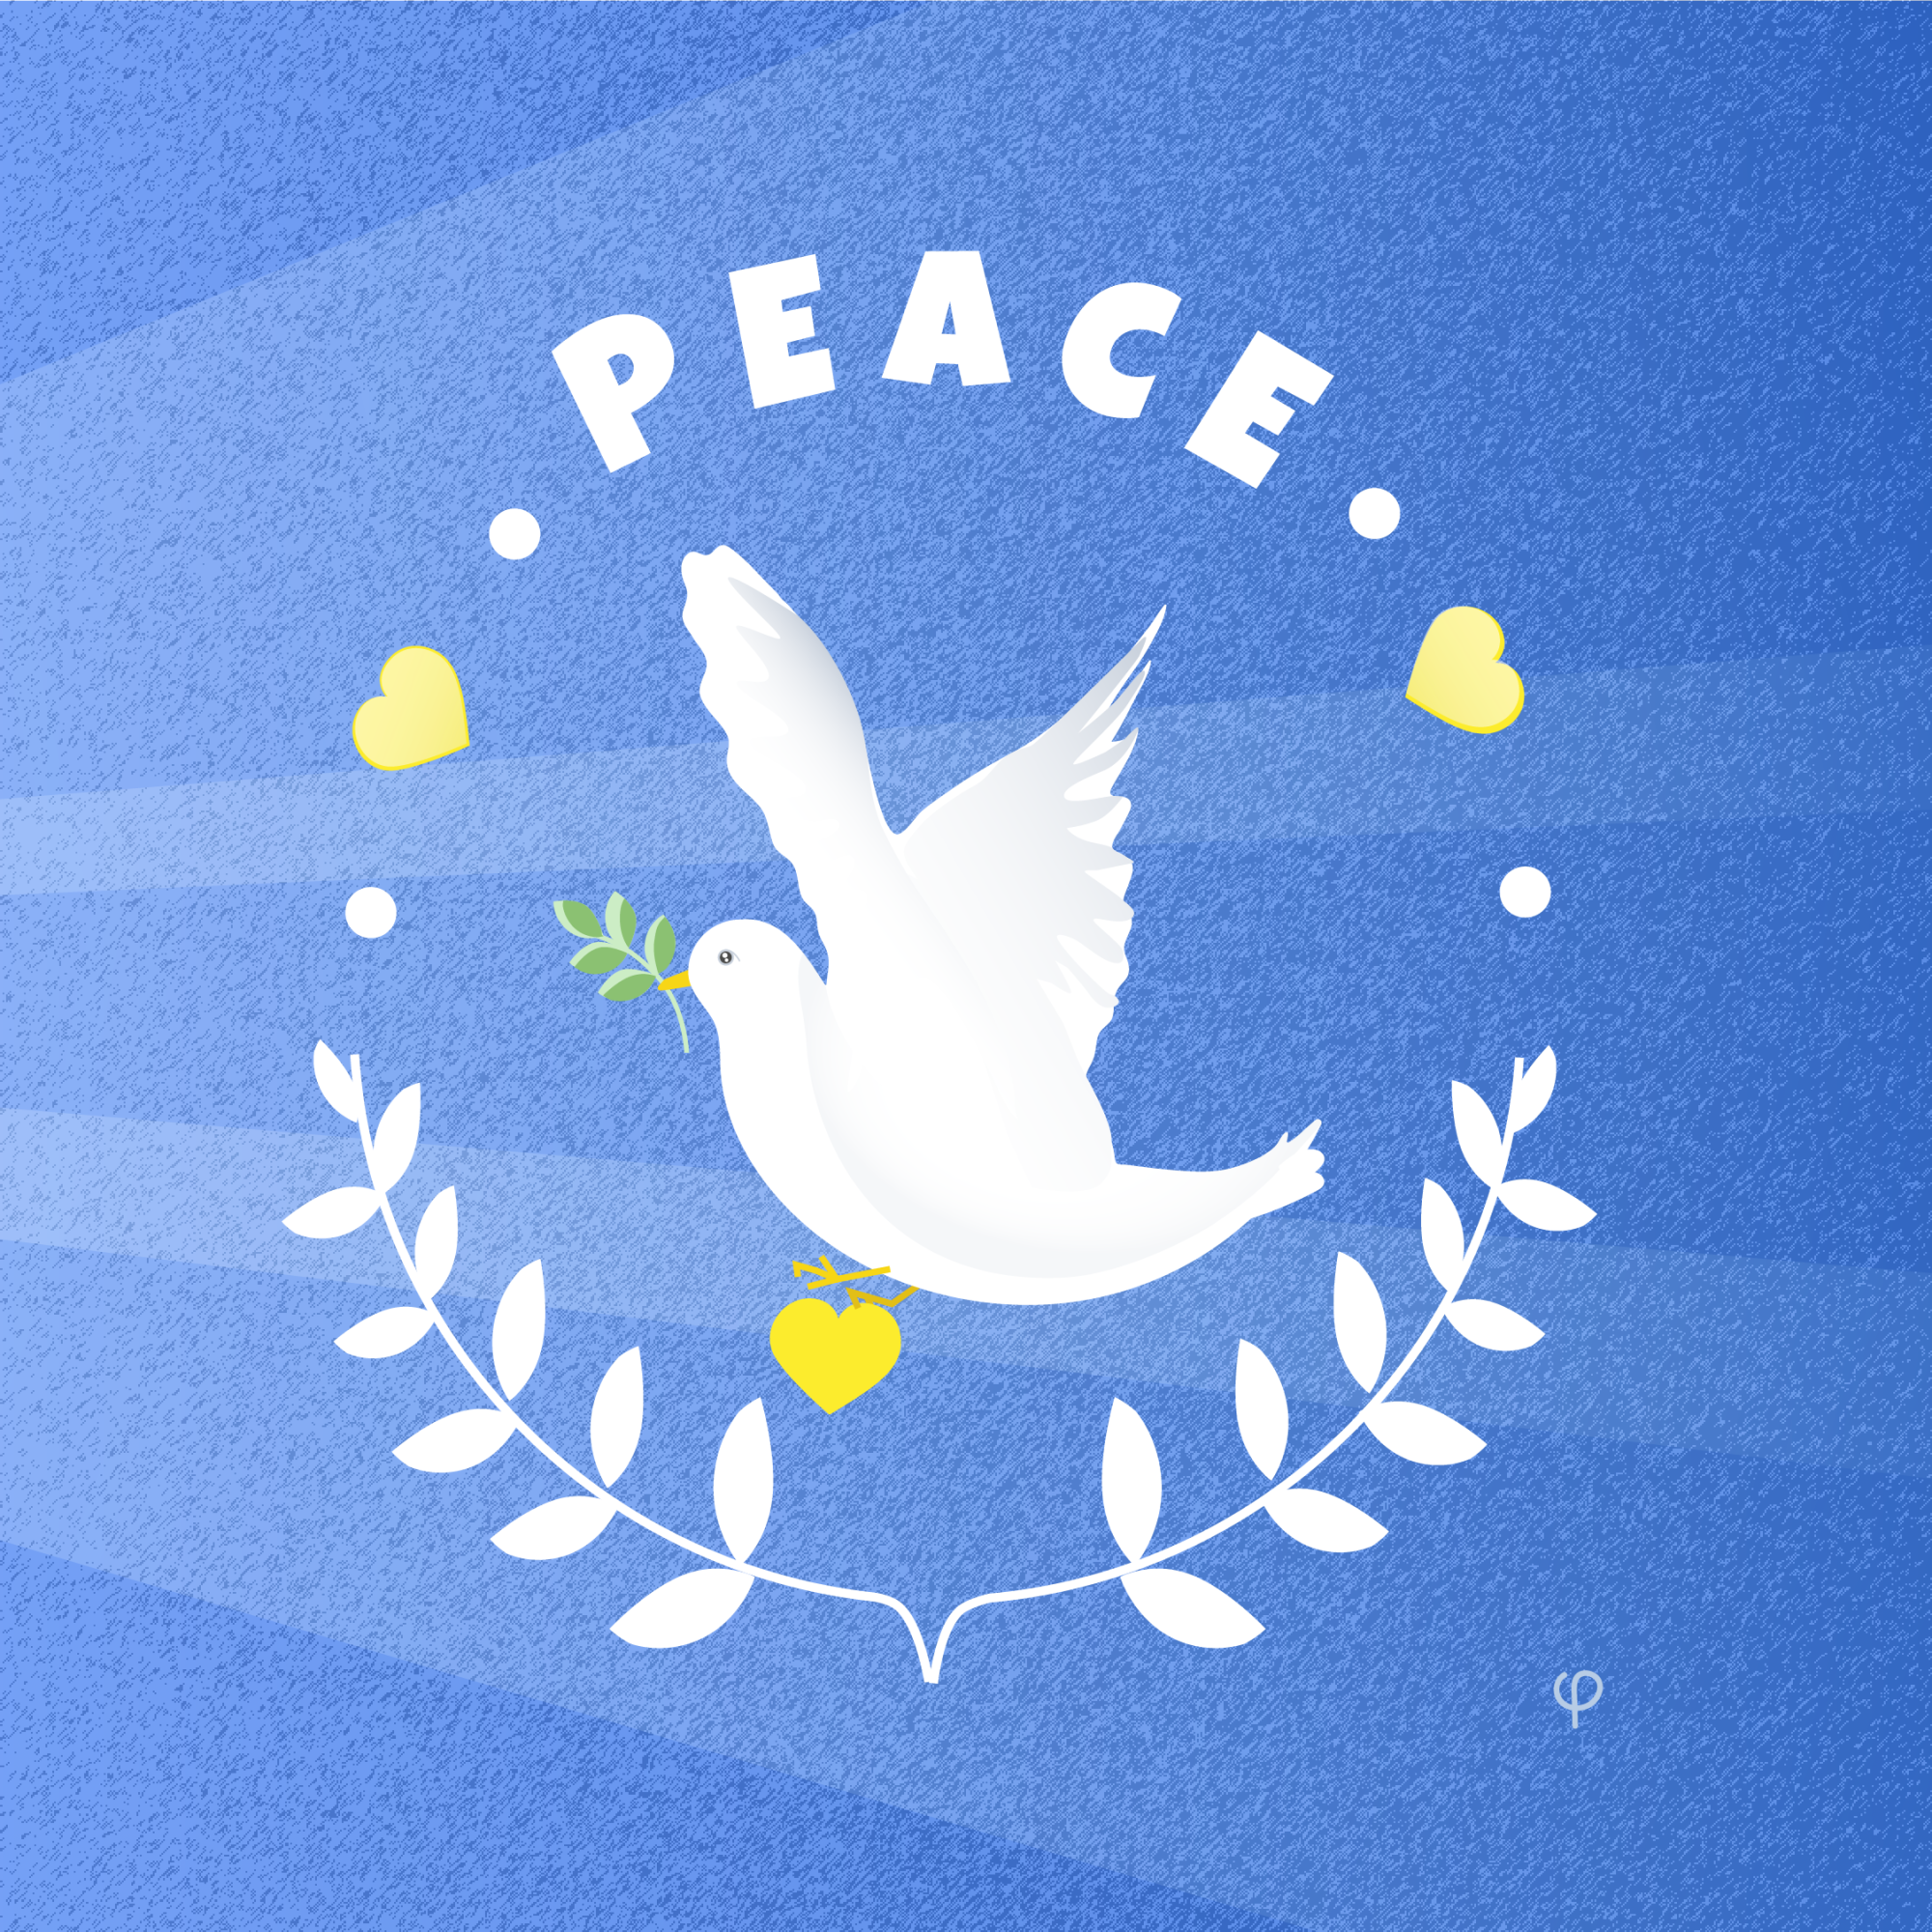 A white dove Against a blue background. The dove carries a green olive branch in its mouth, and carries a golden heart in its claws. Above the word Peace creates the top of a circle and more branches finish the circle underneath.